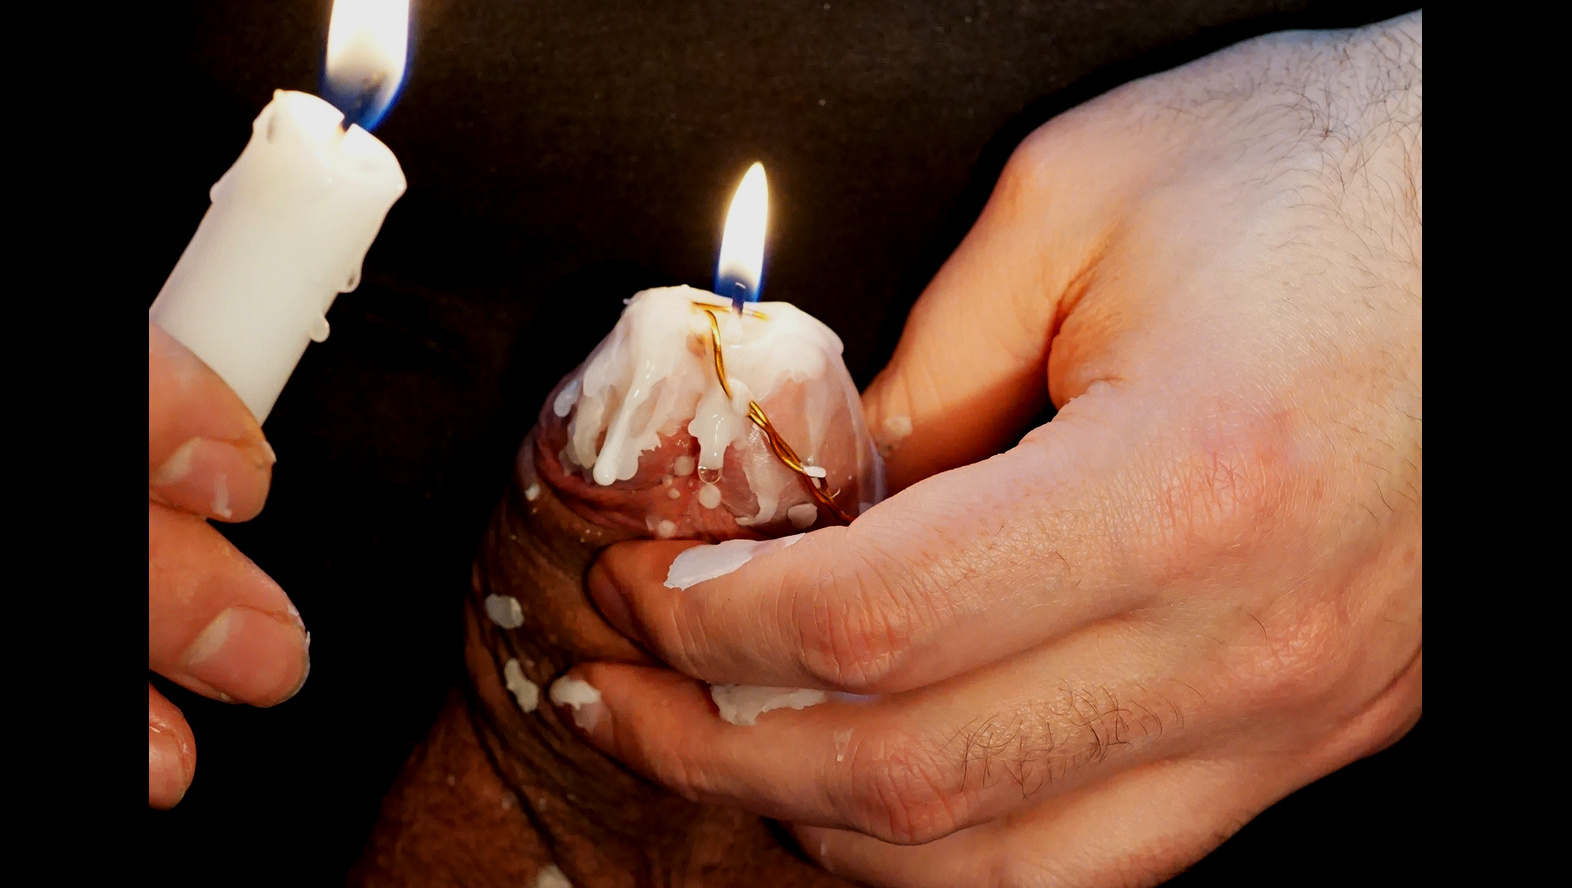 Cock Candle Burning Cbt Pouring Wax In Urethra Making 